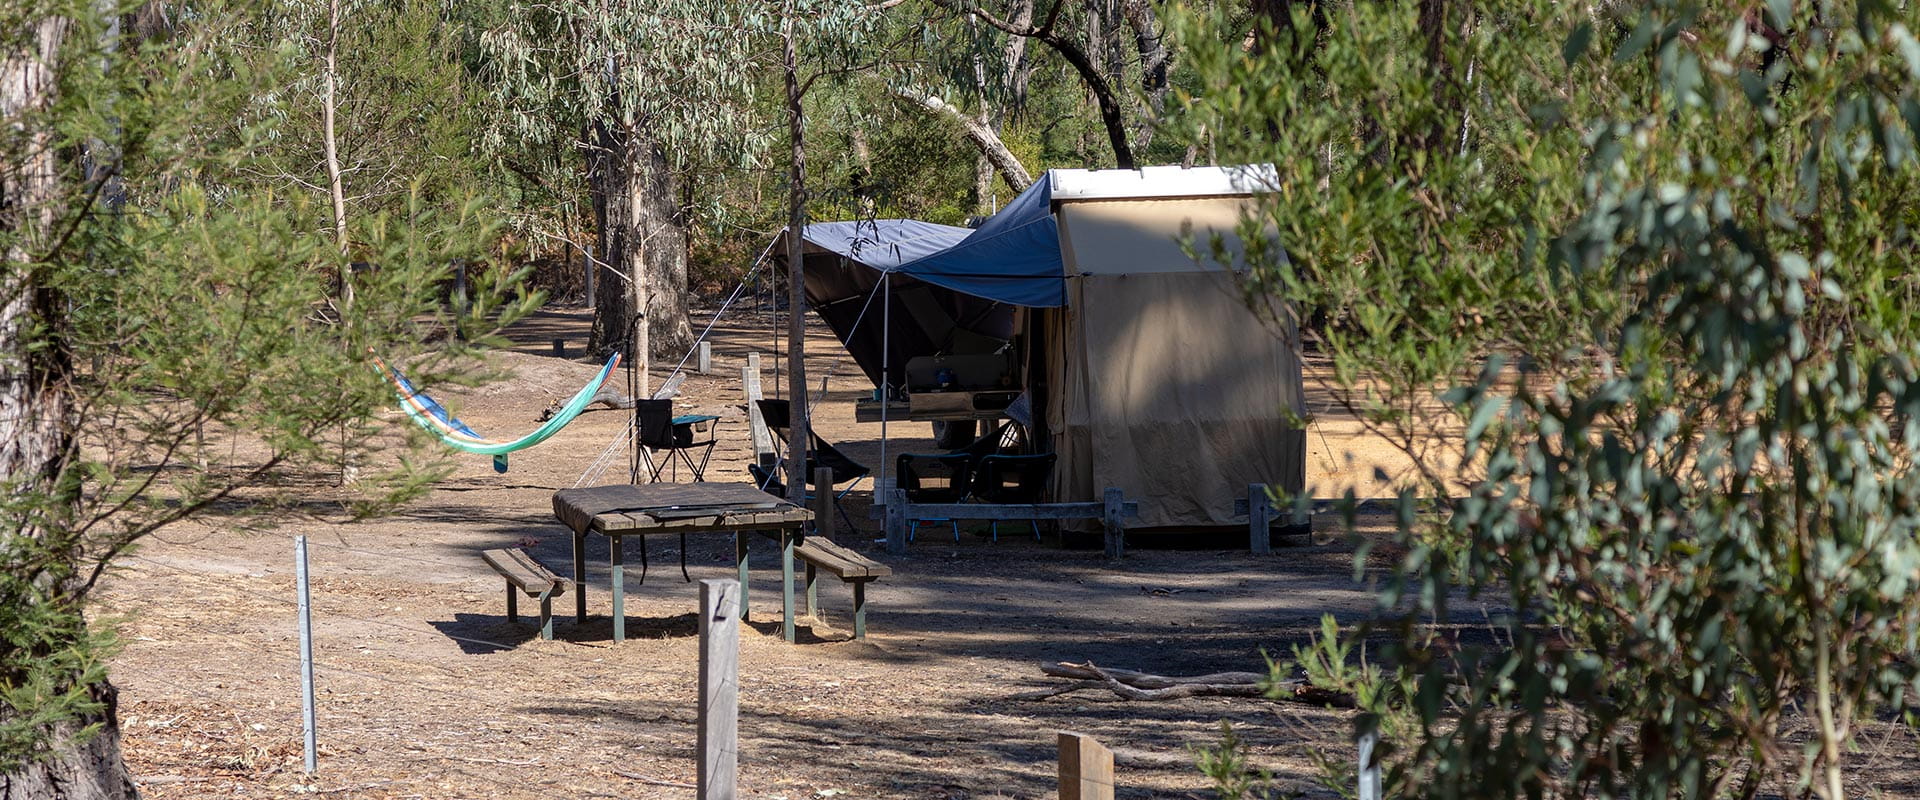 A drive in campground with a 4wd and tent set up amongst trees